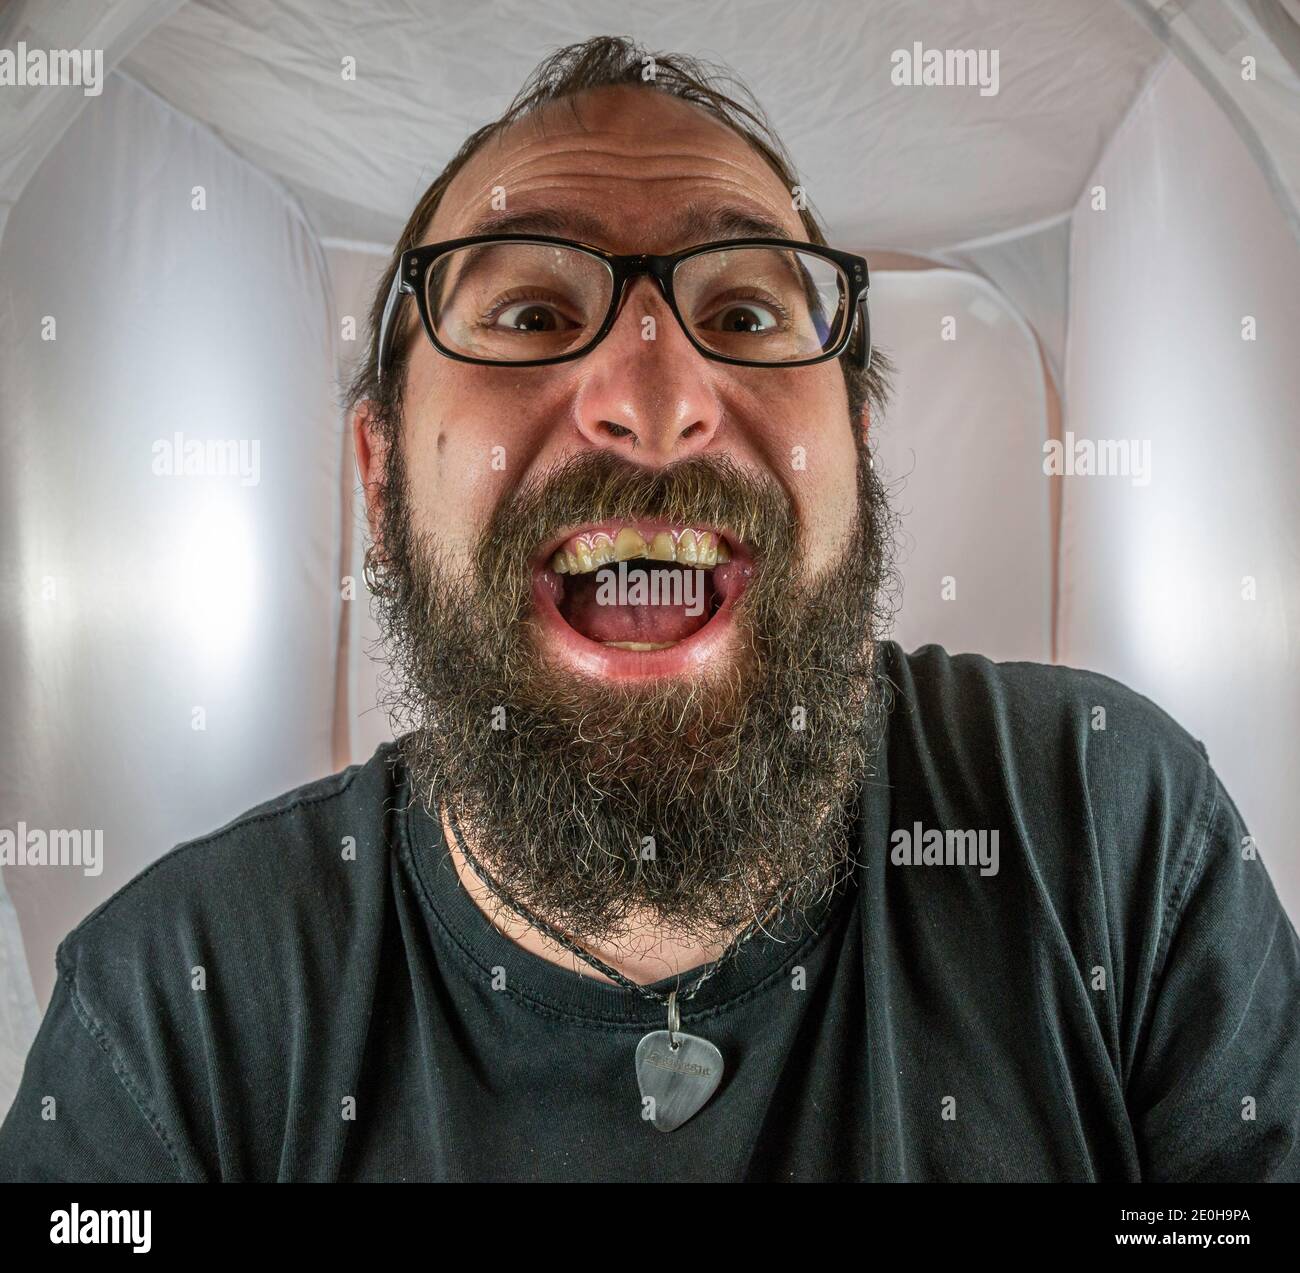 A bearded gleeful and gloating man in a good mood with black glasses Stock Photo